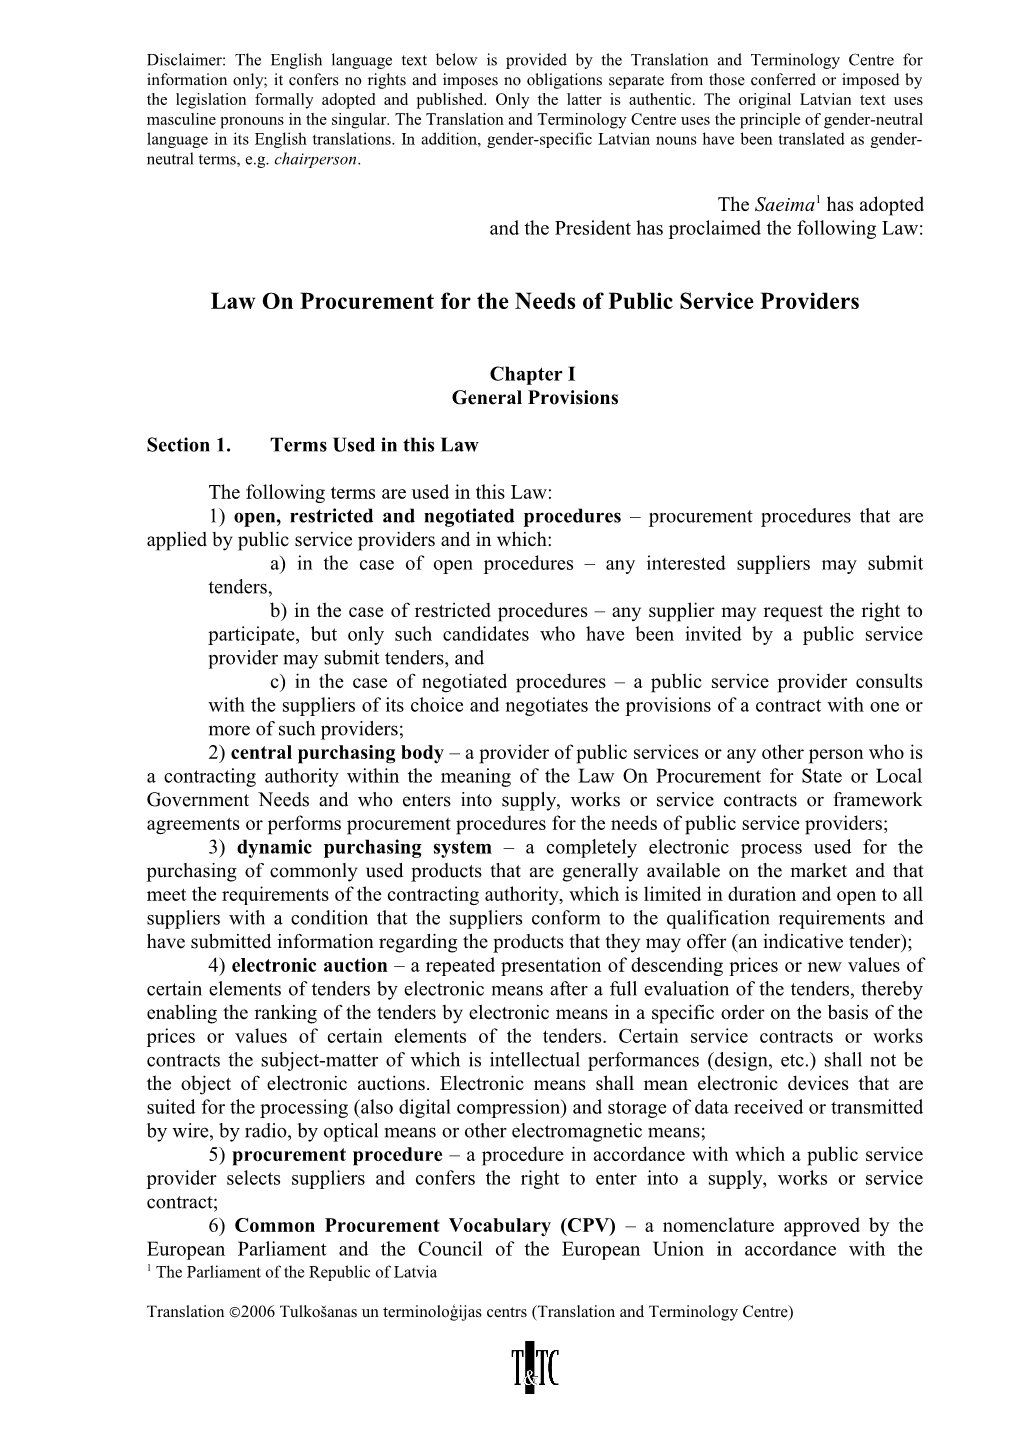 Law on Procurement for the Needs of Public Service Providers